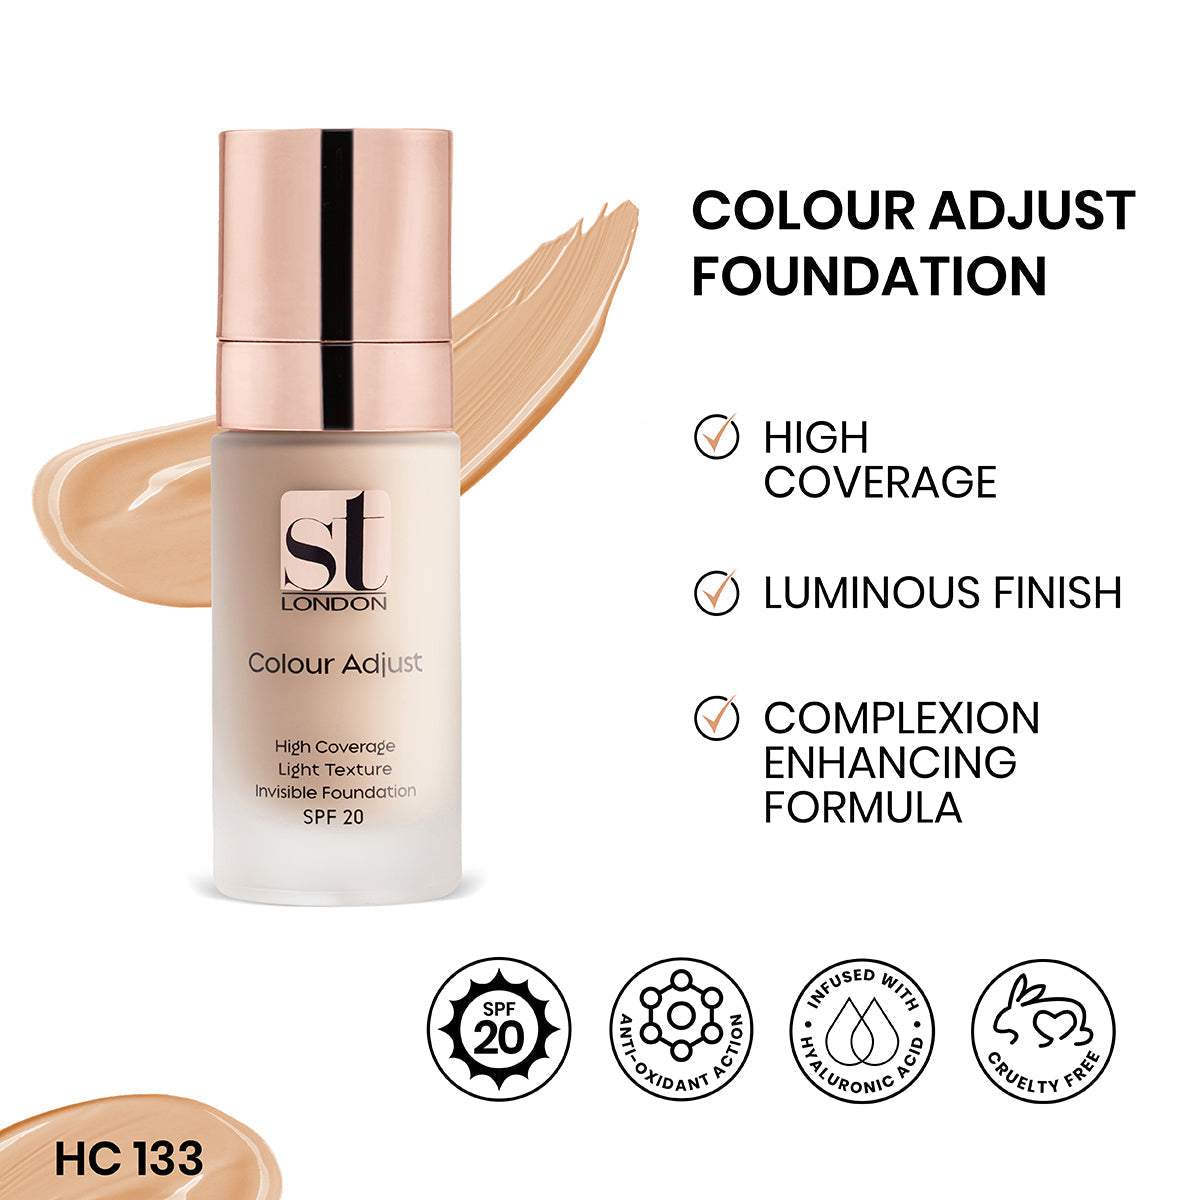 Buy  ST London Color Adjust High Coverage Foundation - Hc 133 at Best Price Online in Pakistan